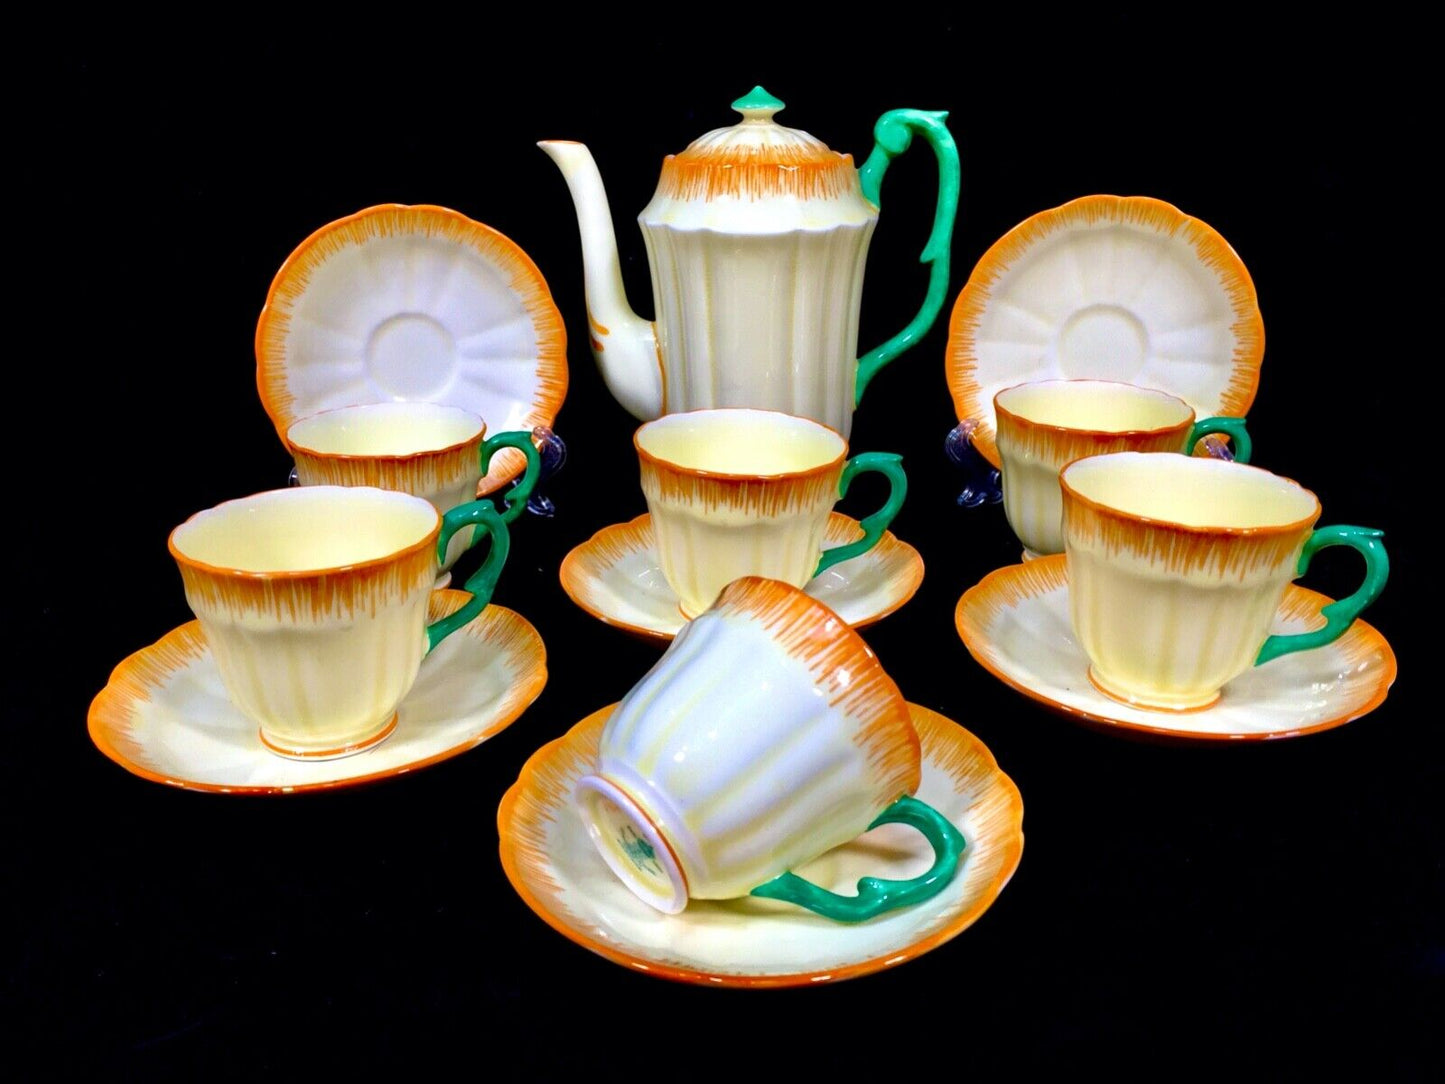 Antique Crown Staffordshire China Coffee Service Set for 6 People / Art Deco